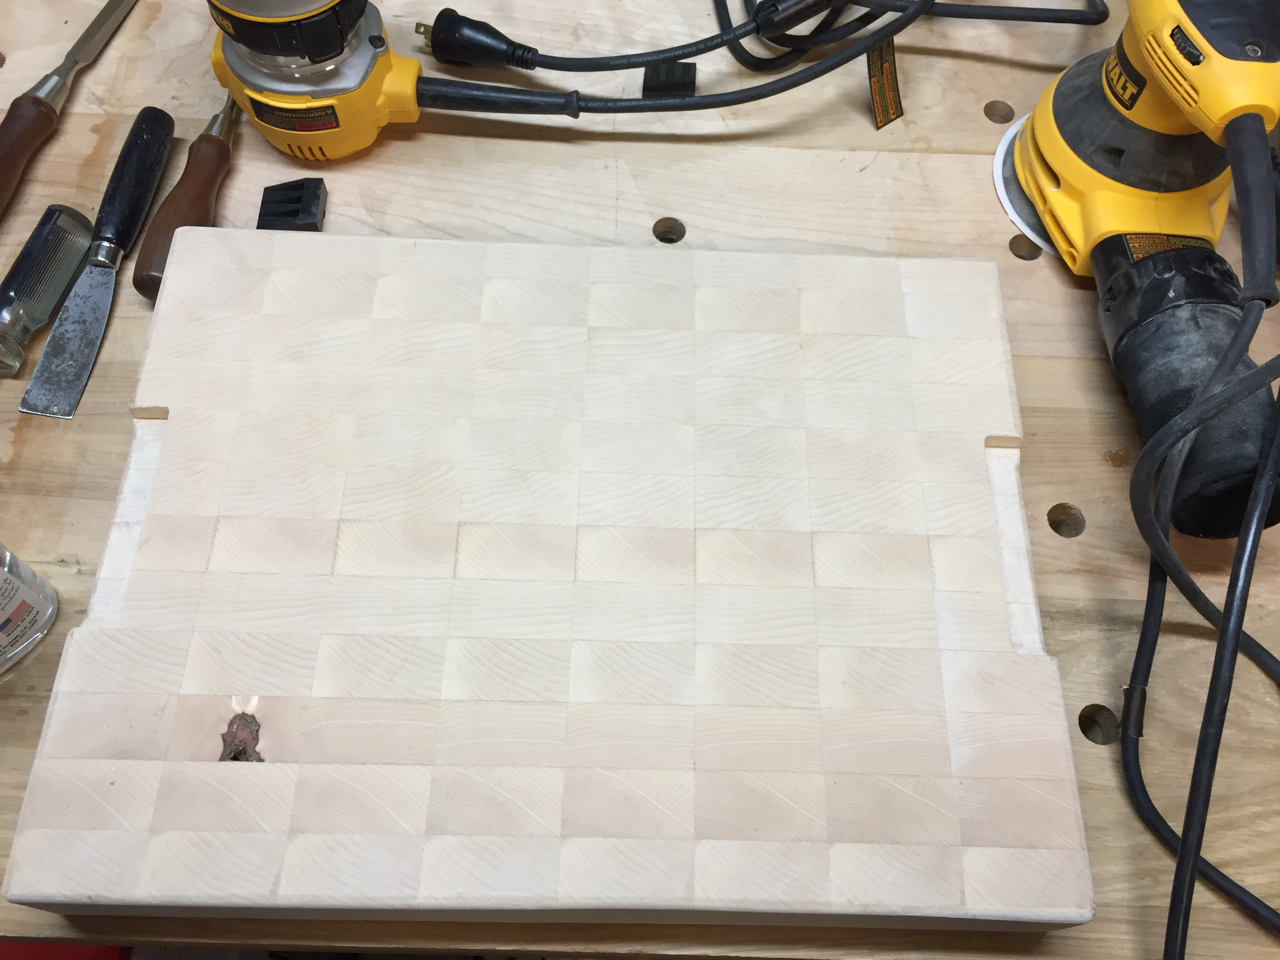 Cutting Board Build - Handholds